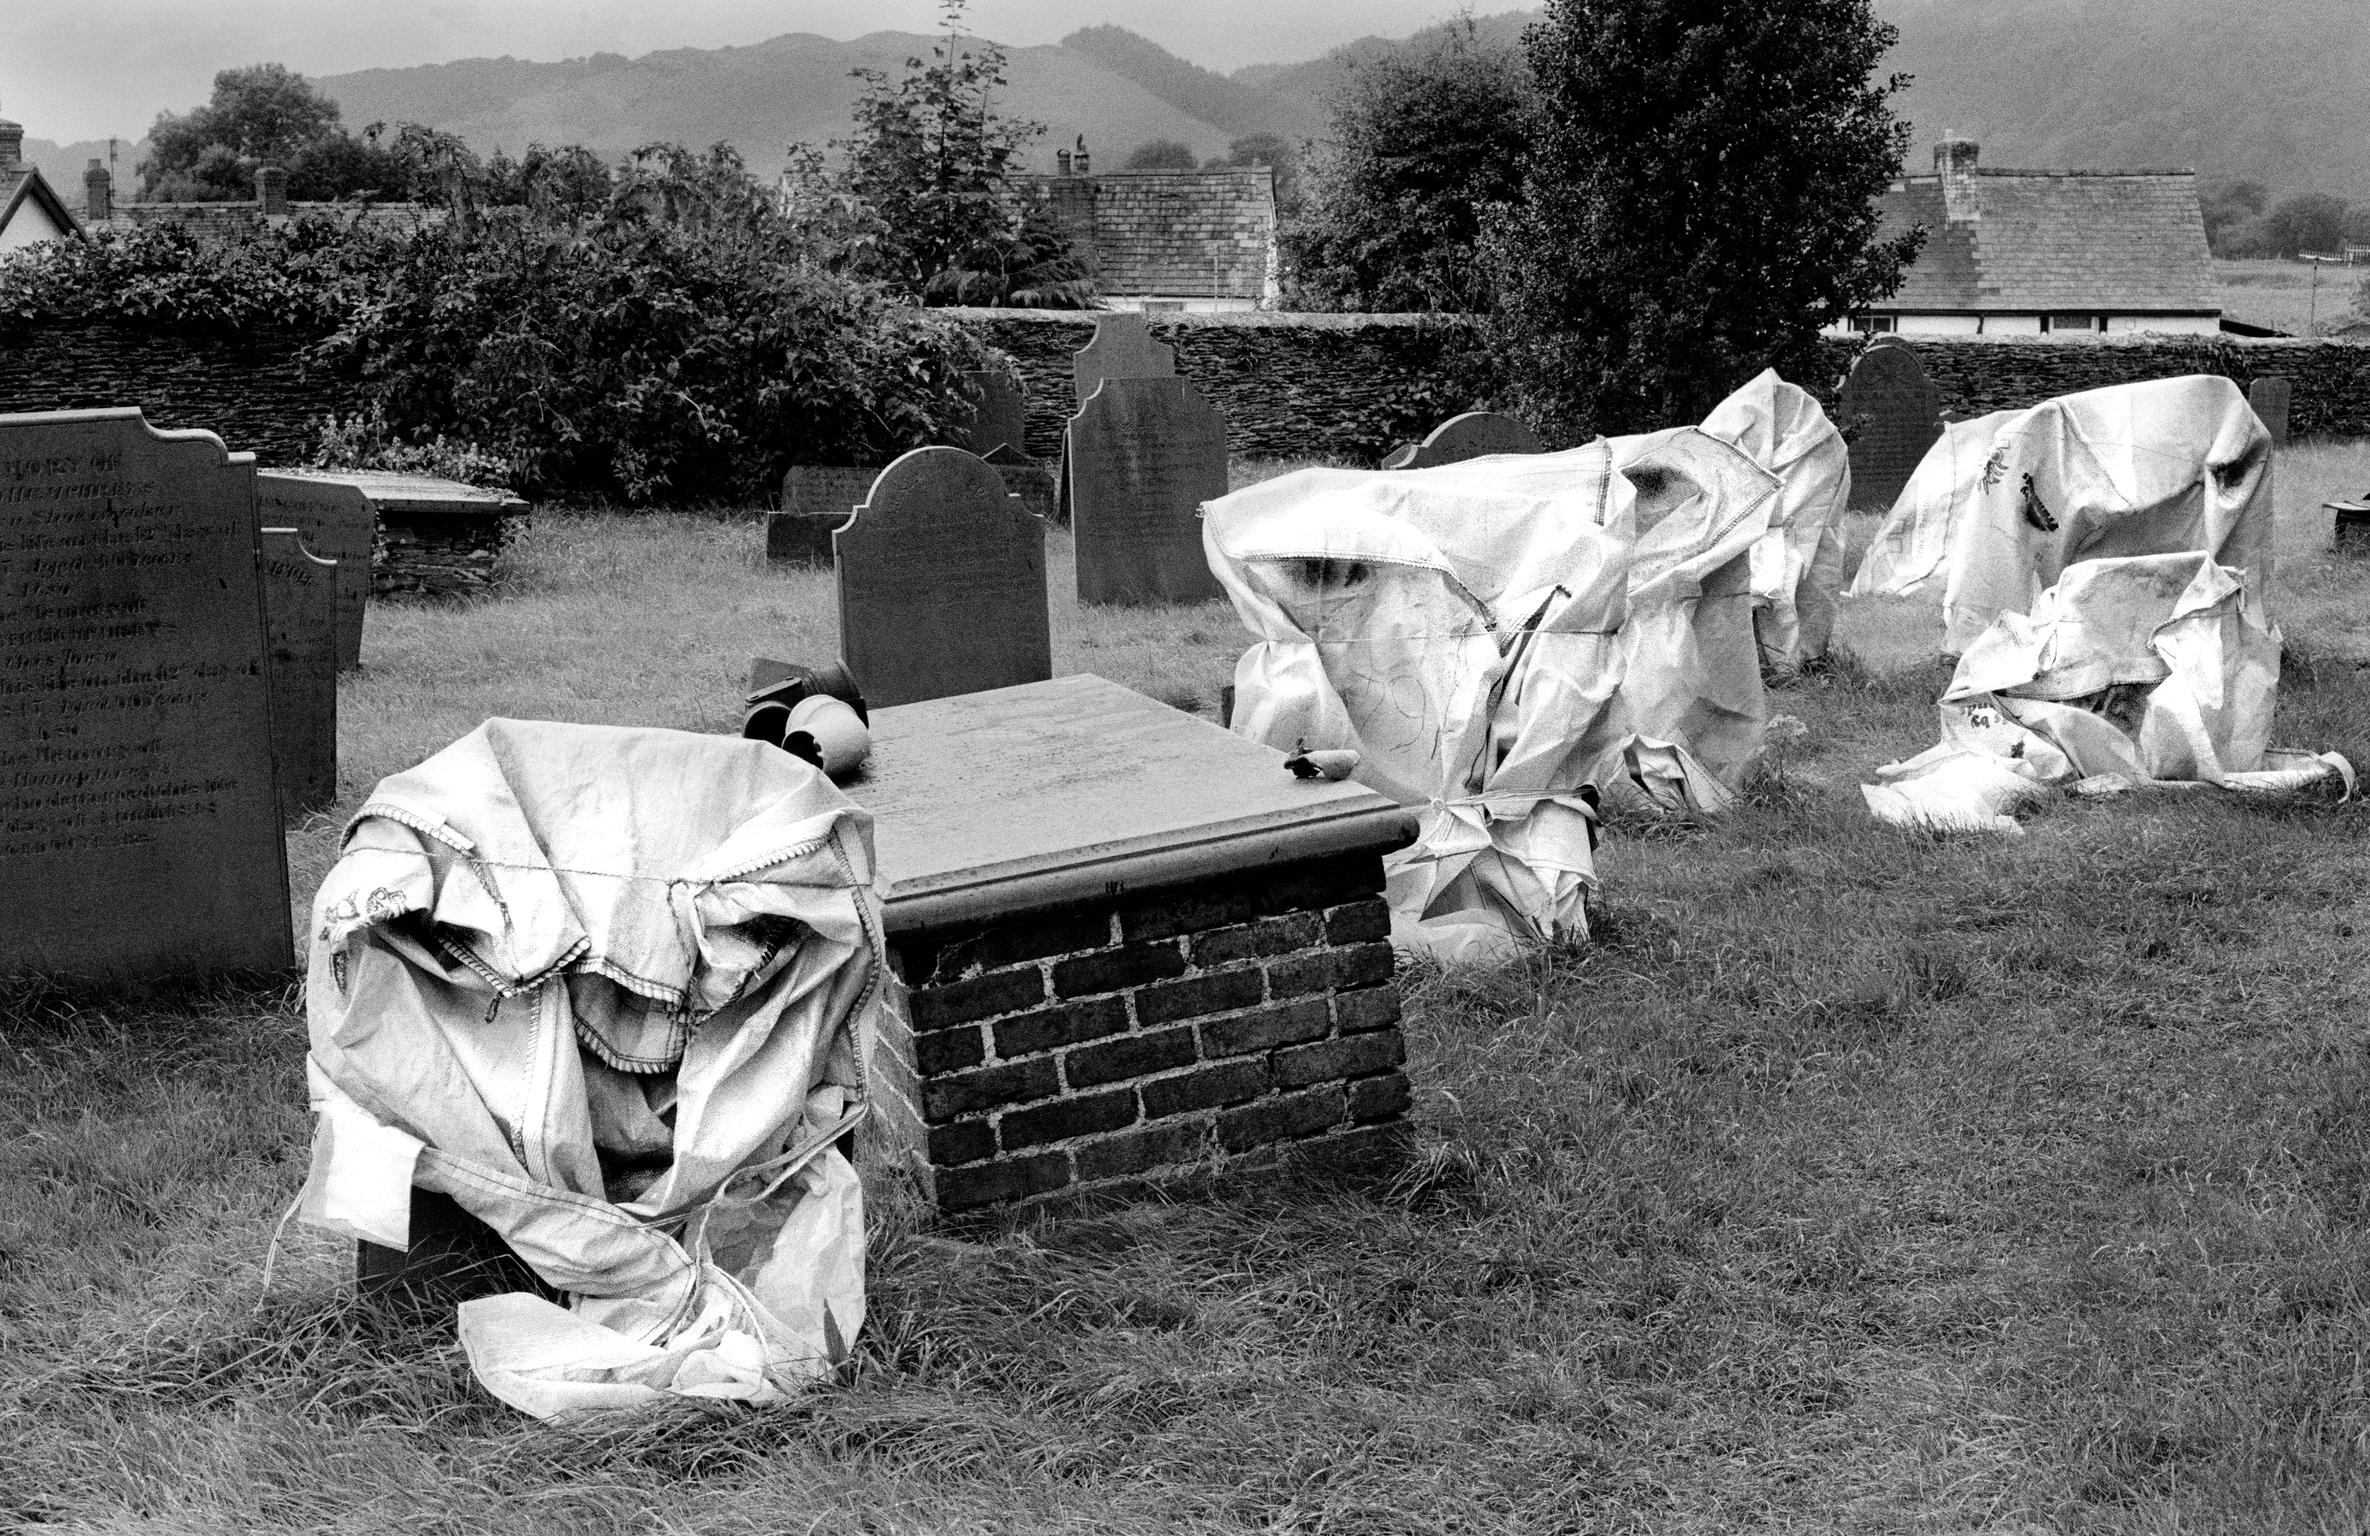 The graveyard. Grave stones being repaired, looking as though ghosts from the past are appearing from the ground. Machynlleth, Wales